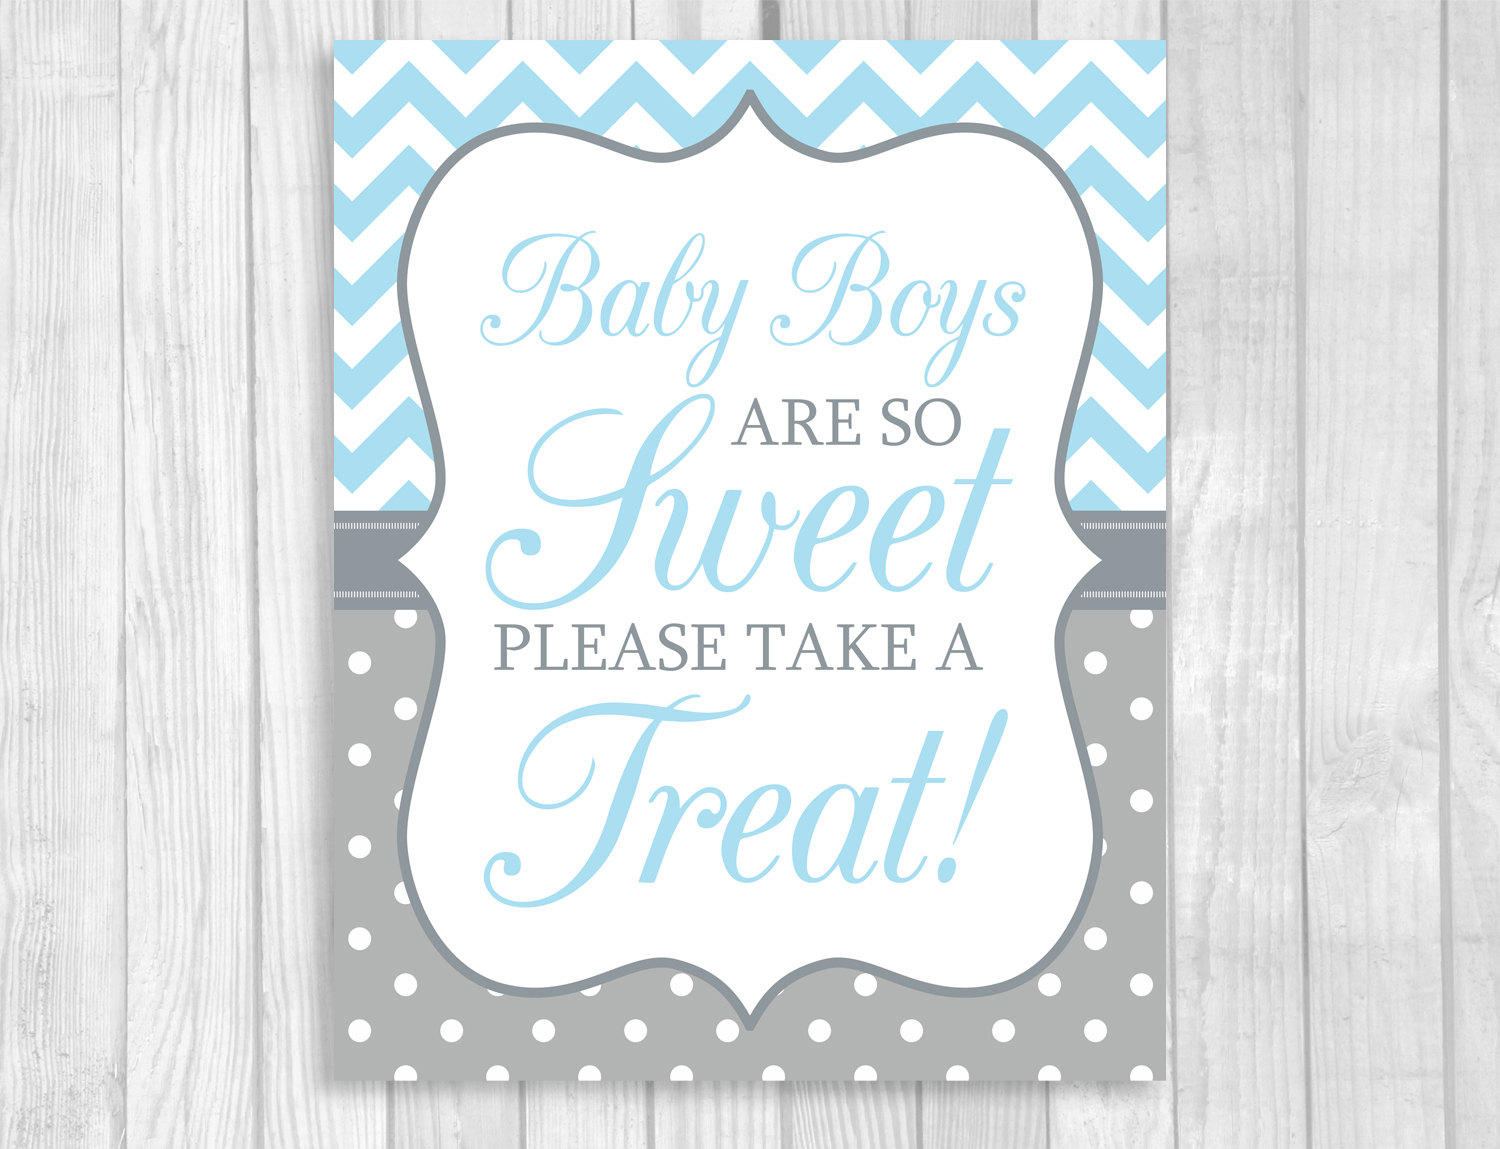 Candy Table Signs For Baby Shower - Baby Shower Ideas - Free Printable Baby Shower Table Signs